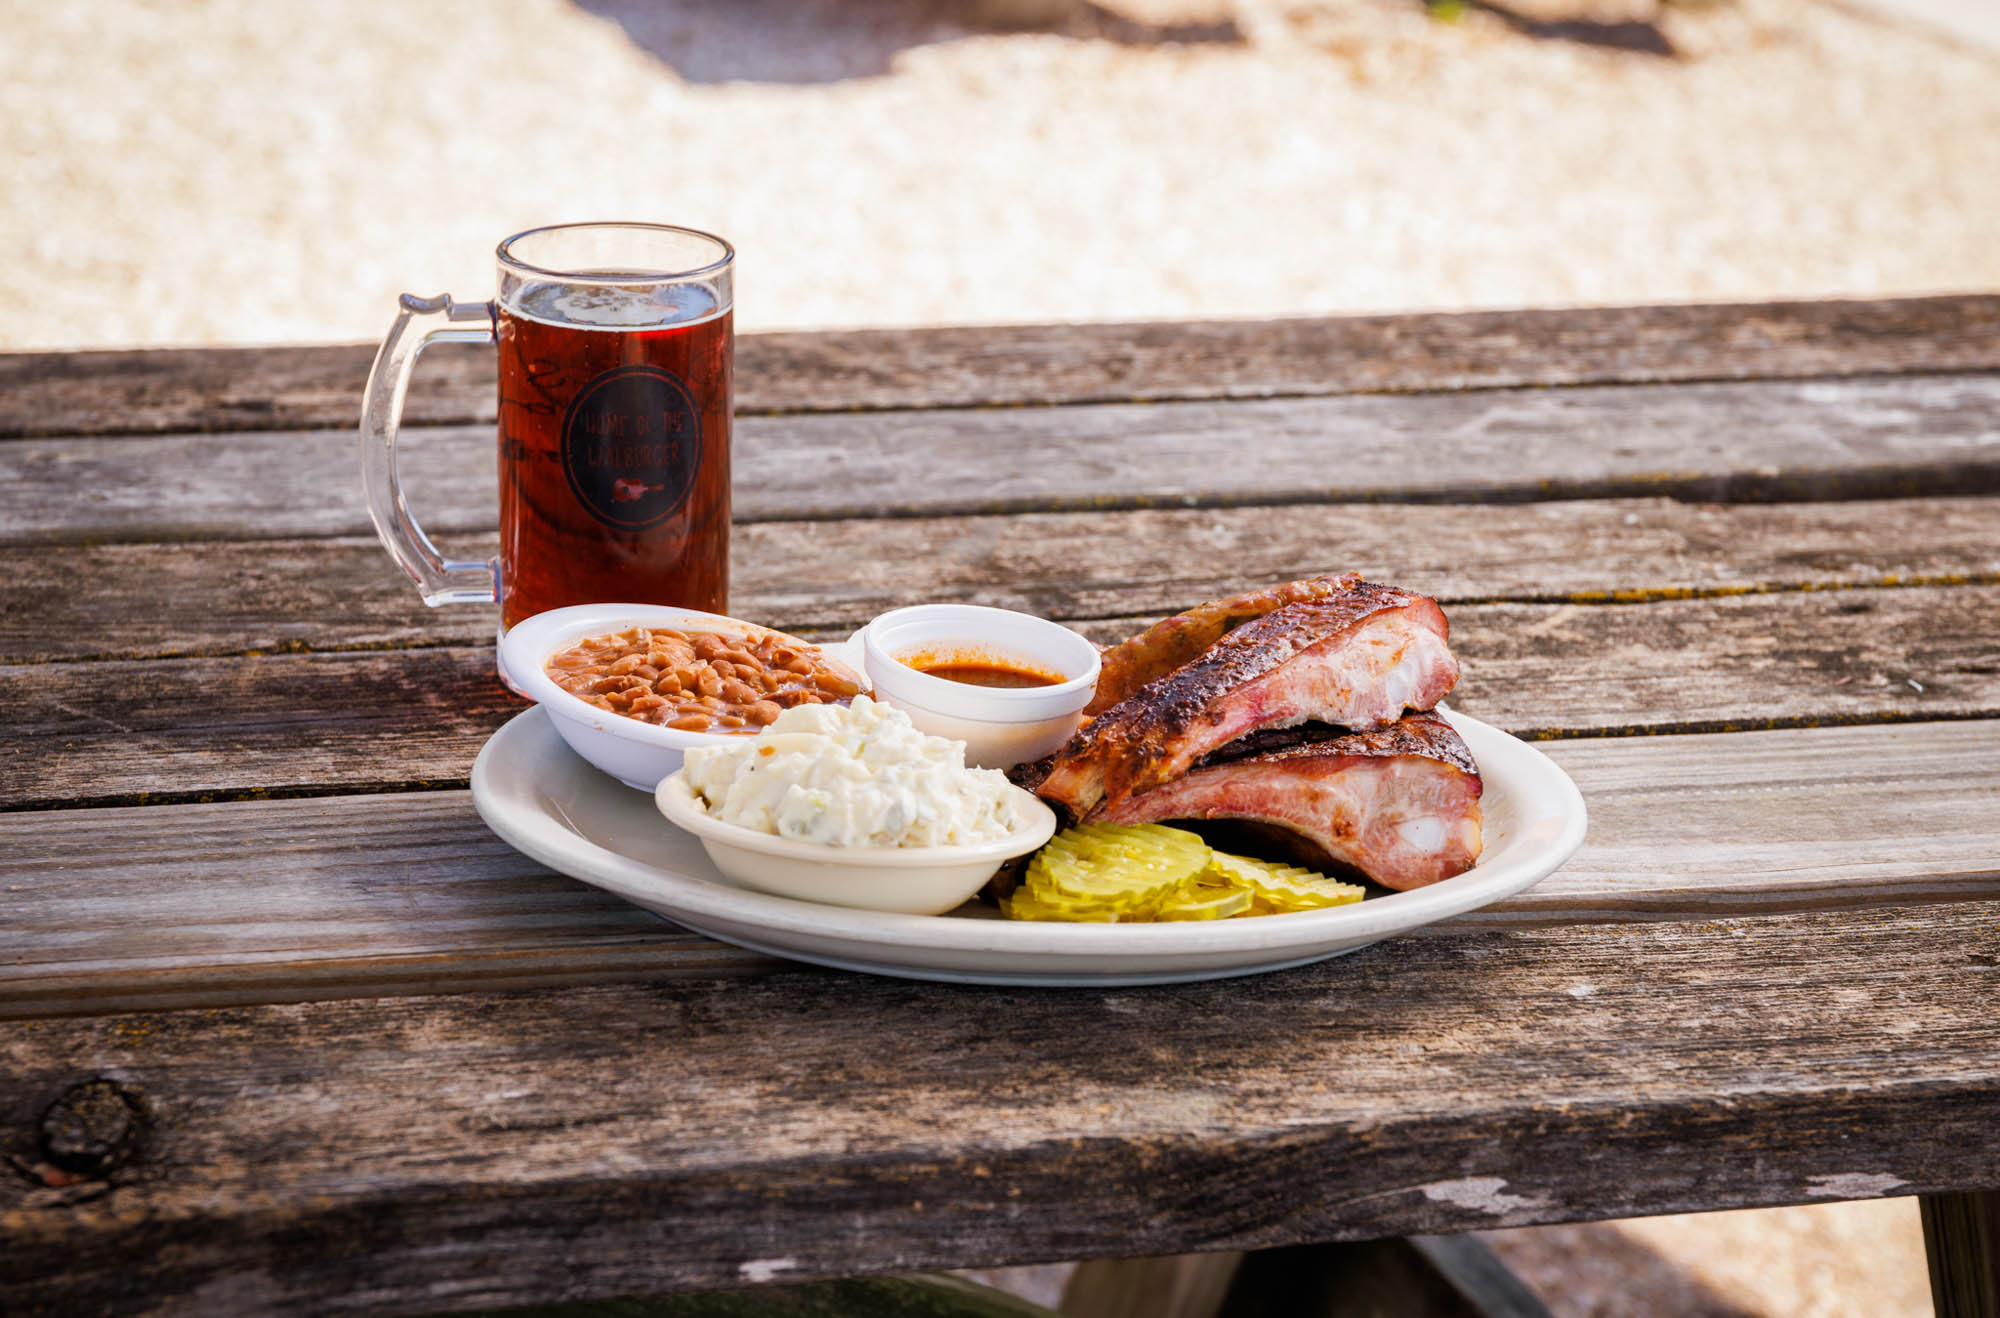 An old wooden picnic table holds a plate of ribs, beans, potato salad, and a red beer.